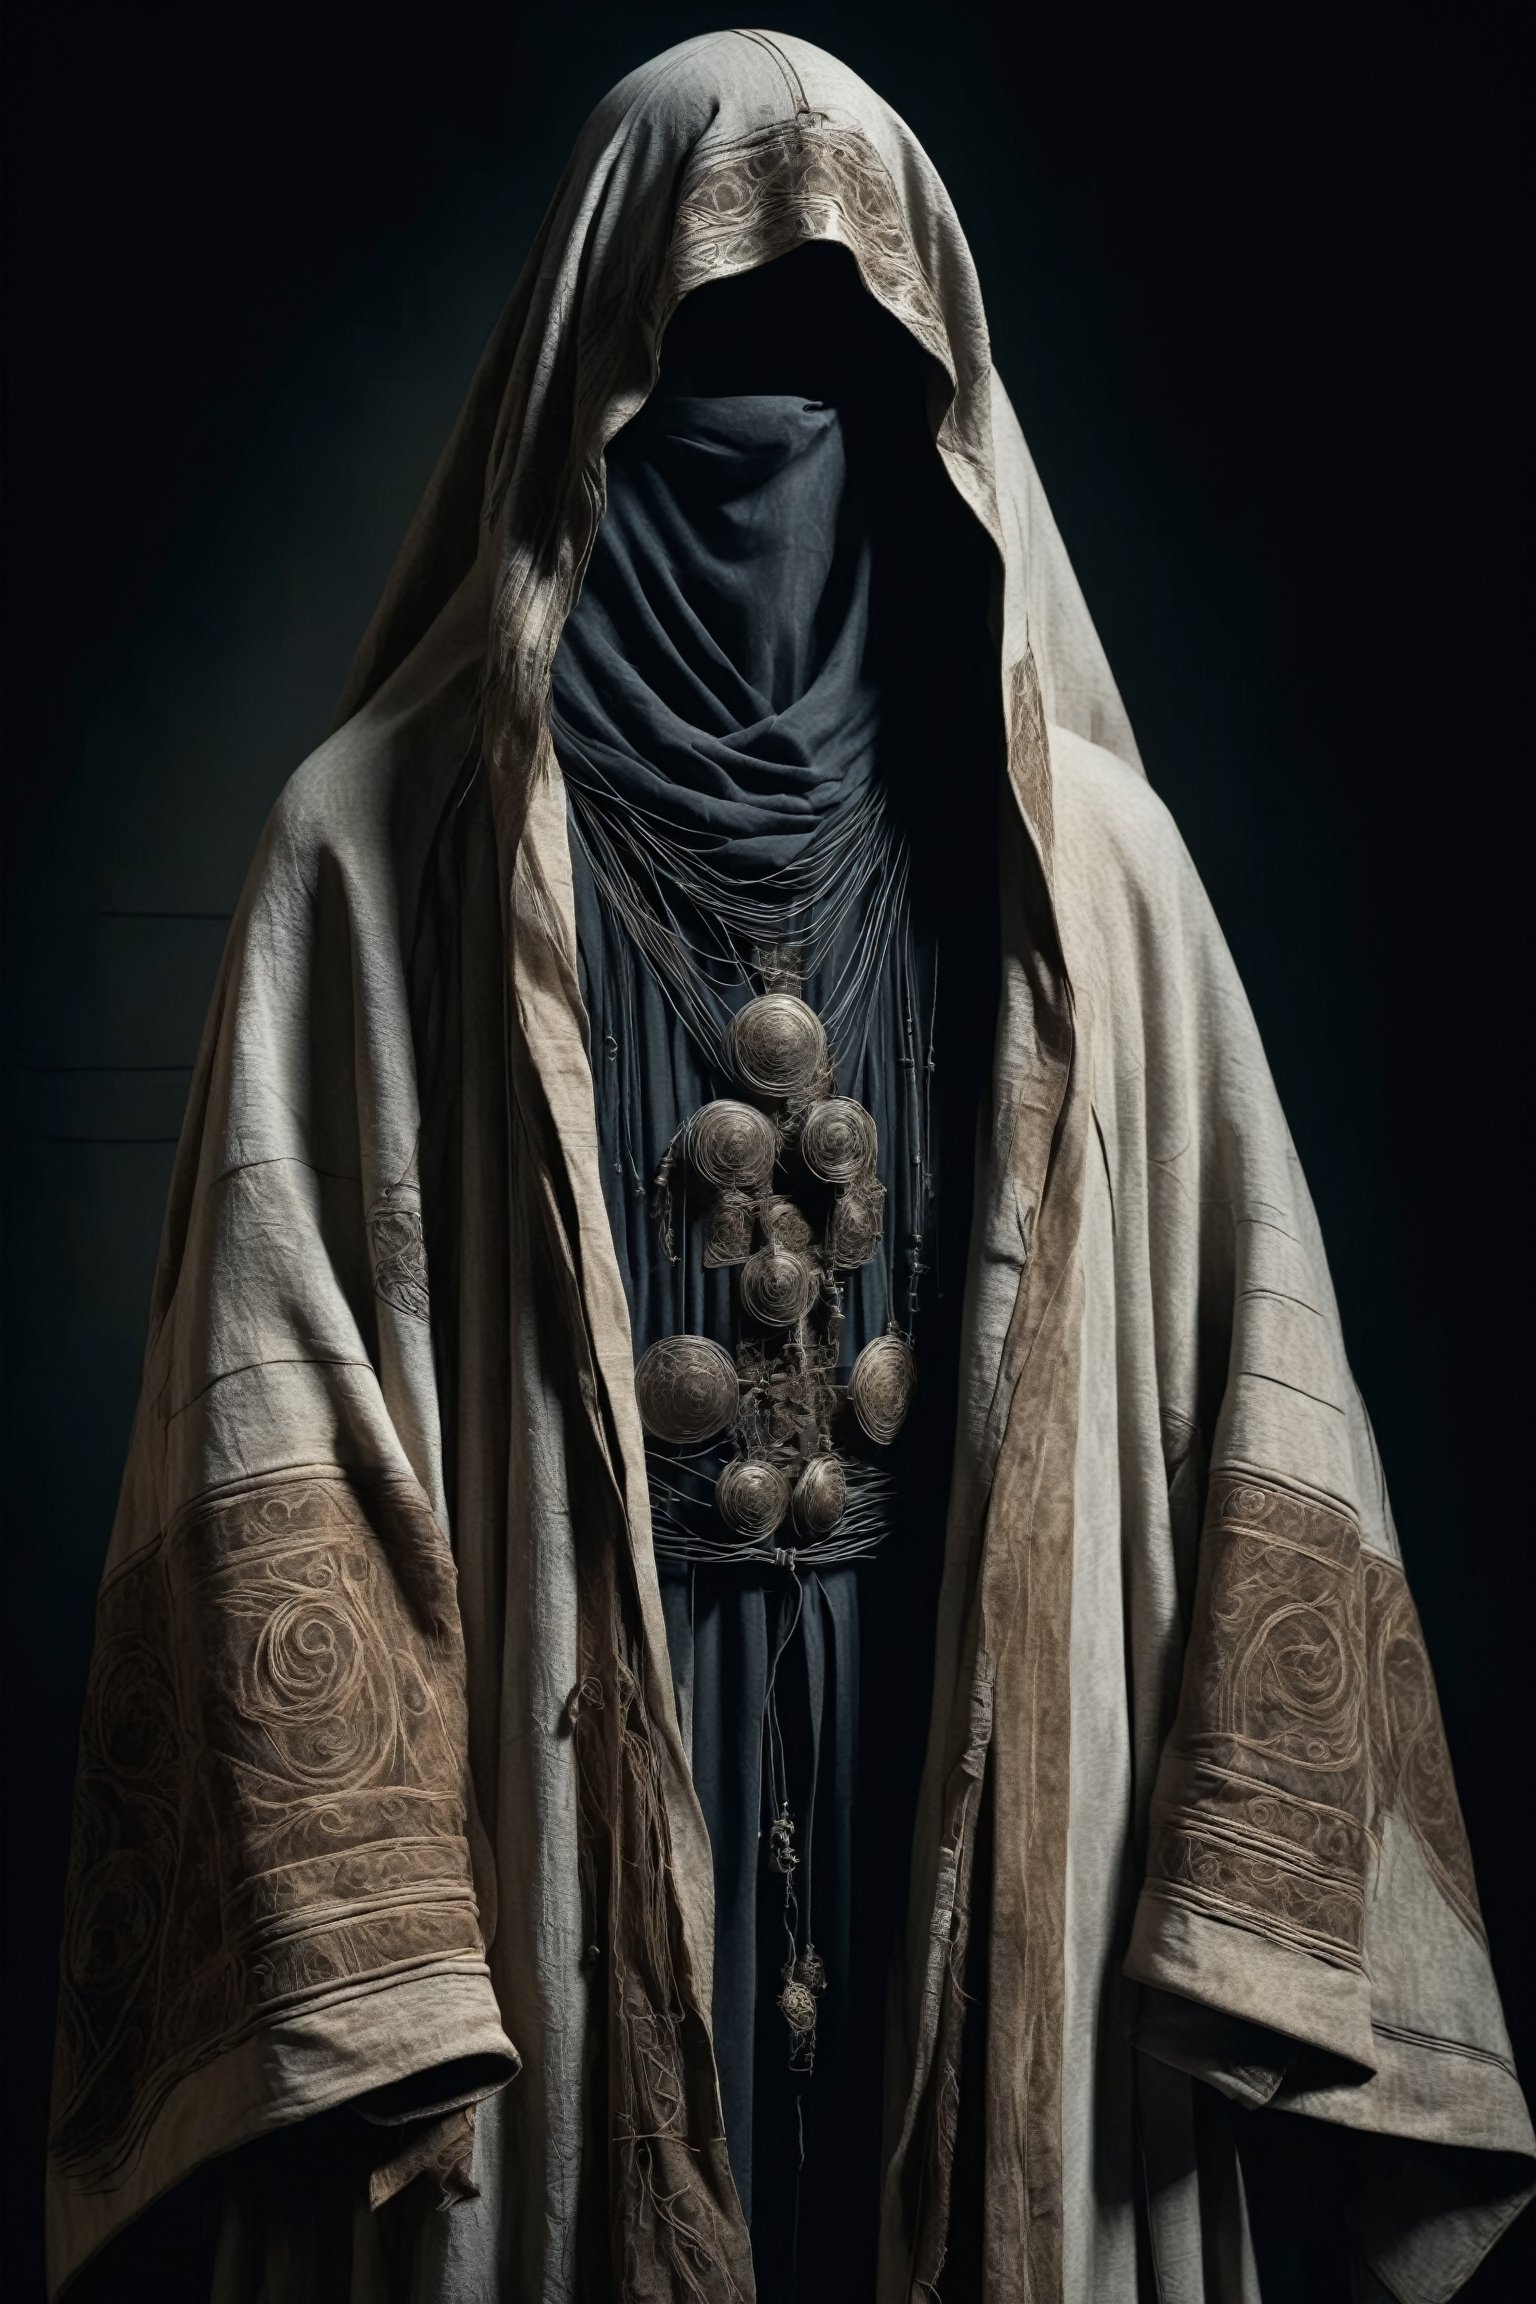 An elderly mannequins dressed in a weathered cloak adorned with traditional Slavic embroidery,((face hidden in the shadows:1.8)),
 His face is mostly obscured by the folds of the robe, but his long beard peeks out from beneath,Despite his advanced age, there's a sense of mystery and wisdom emanating from him, hinting at a lifetime of experiences and stories hidden within.,Hollow,
black wire mannequins